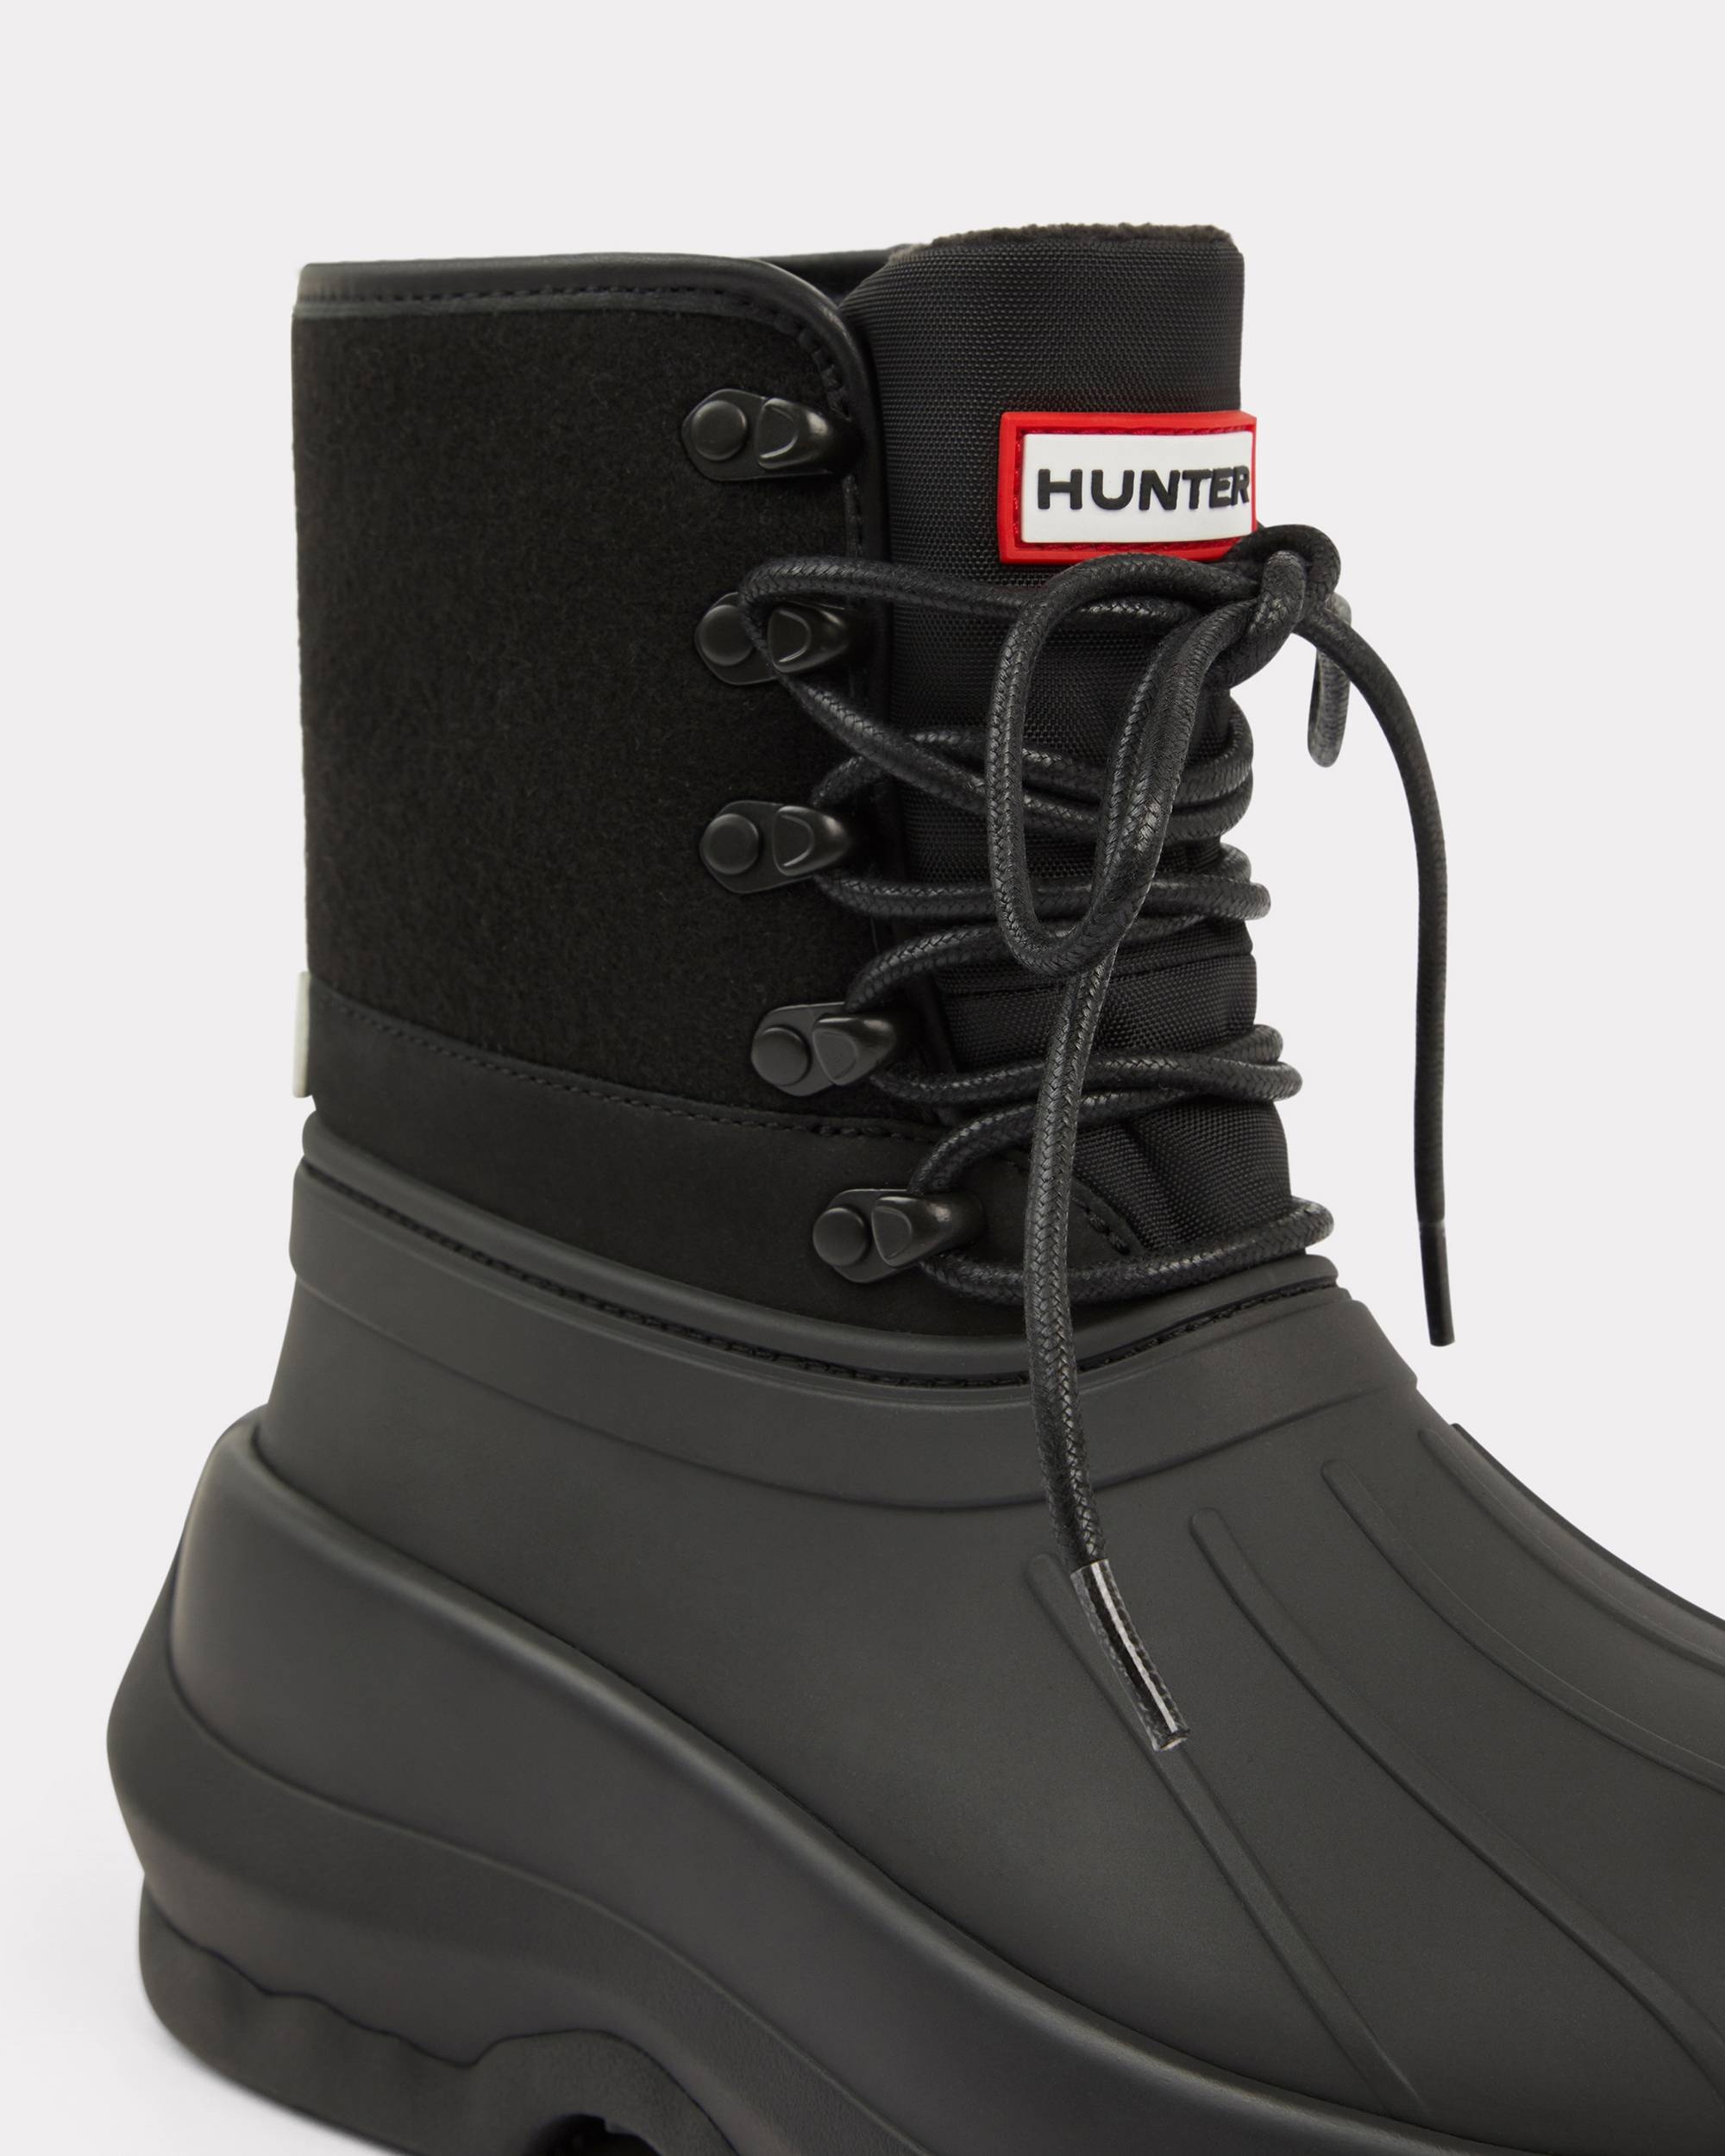 KENZO x HUNTER utilitarian ankle boots - 4